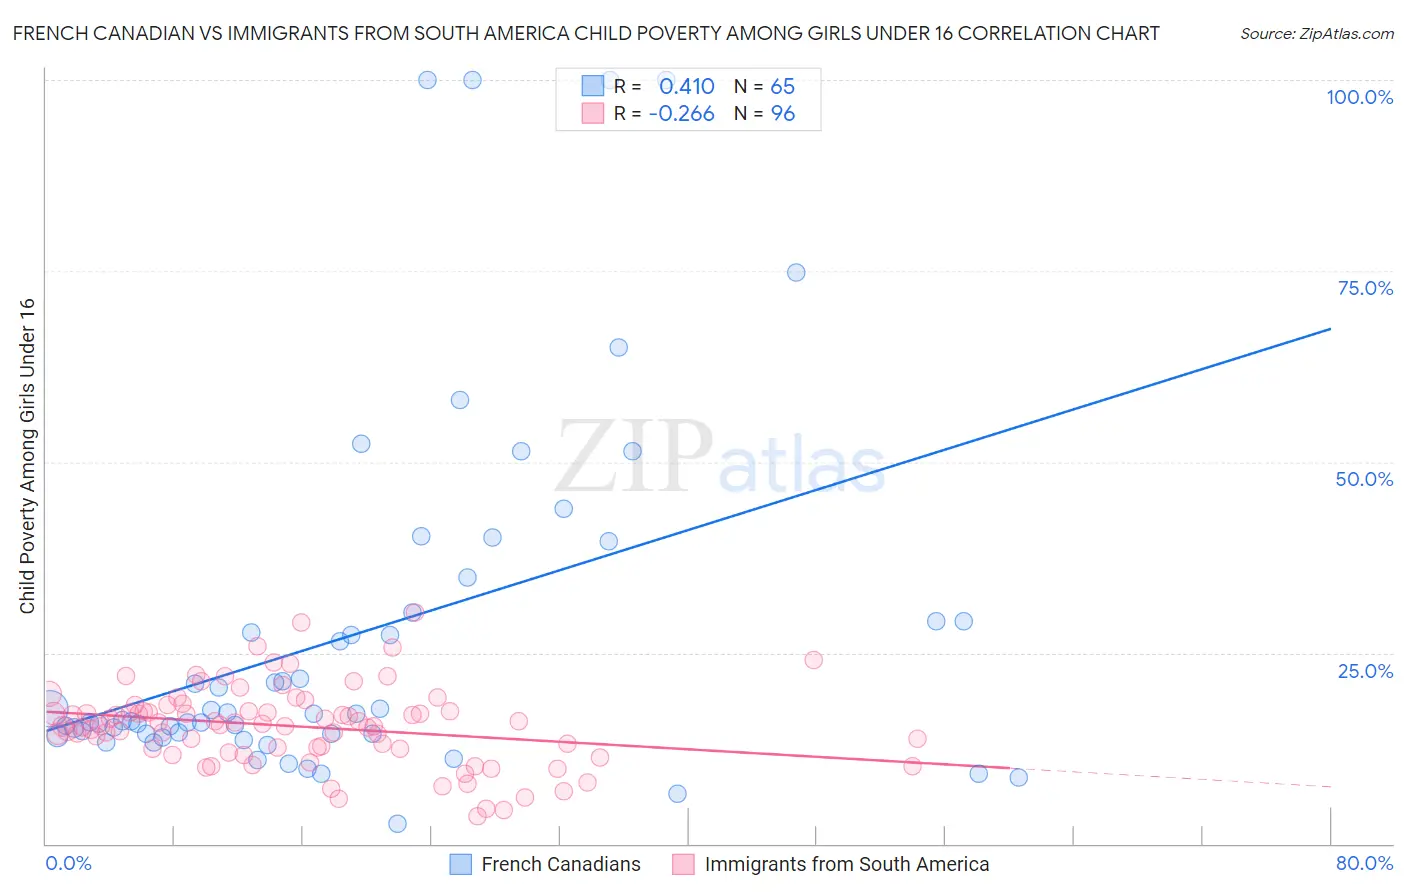 French Canadian vs Immigrants from South America Child Poverty Among Girls Under 16